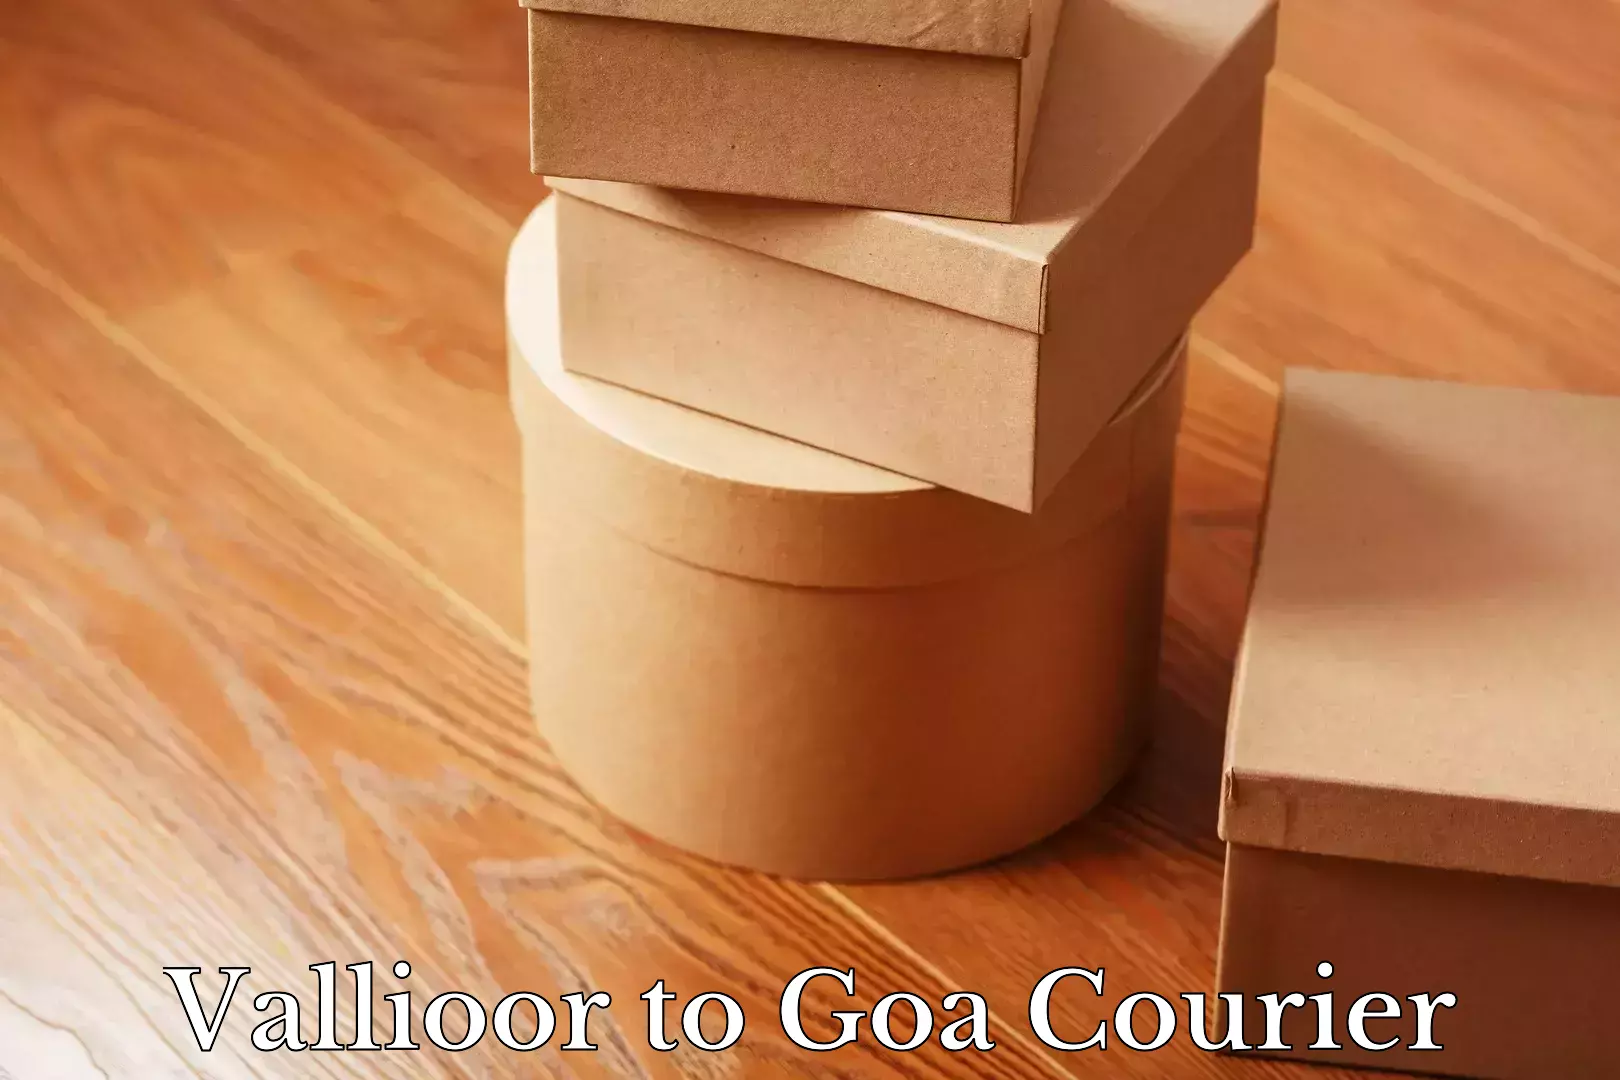 Express delivery network Vallioor to Goa